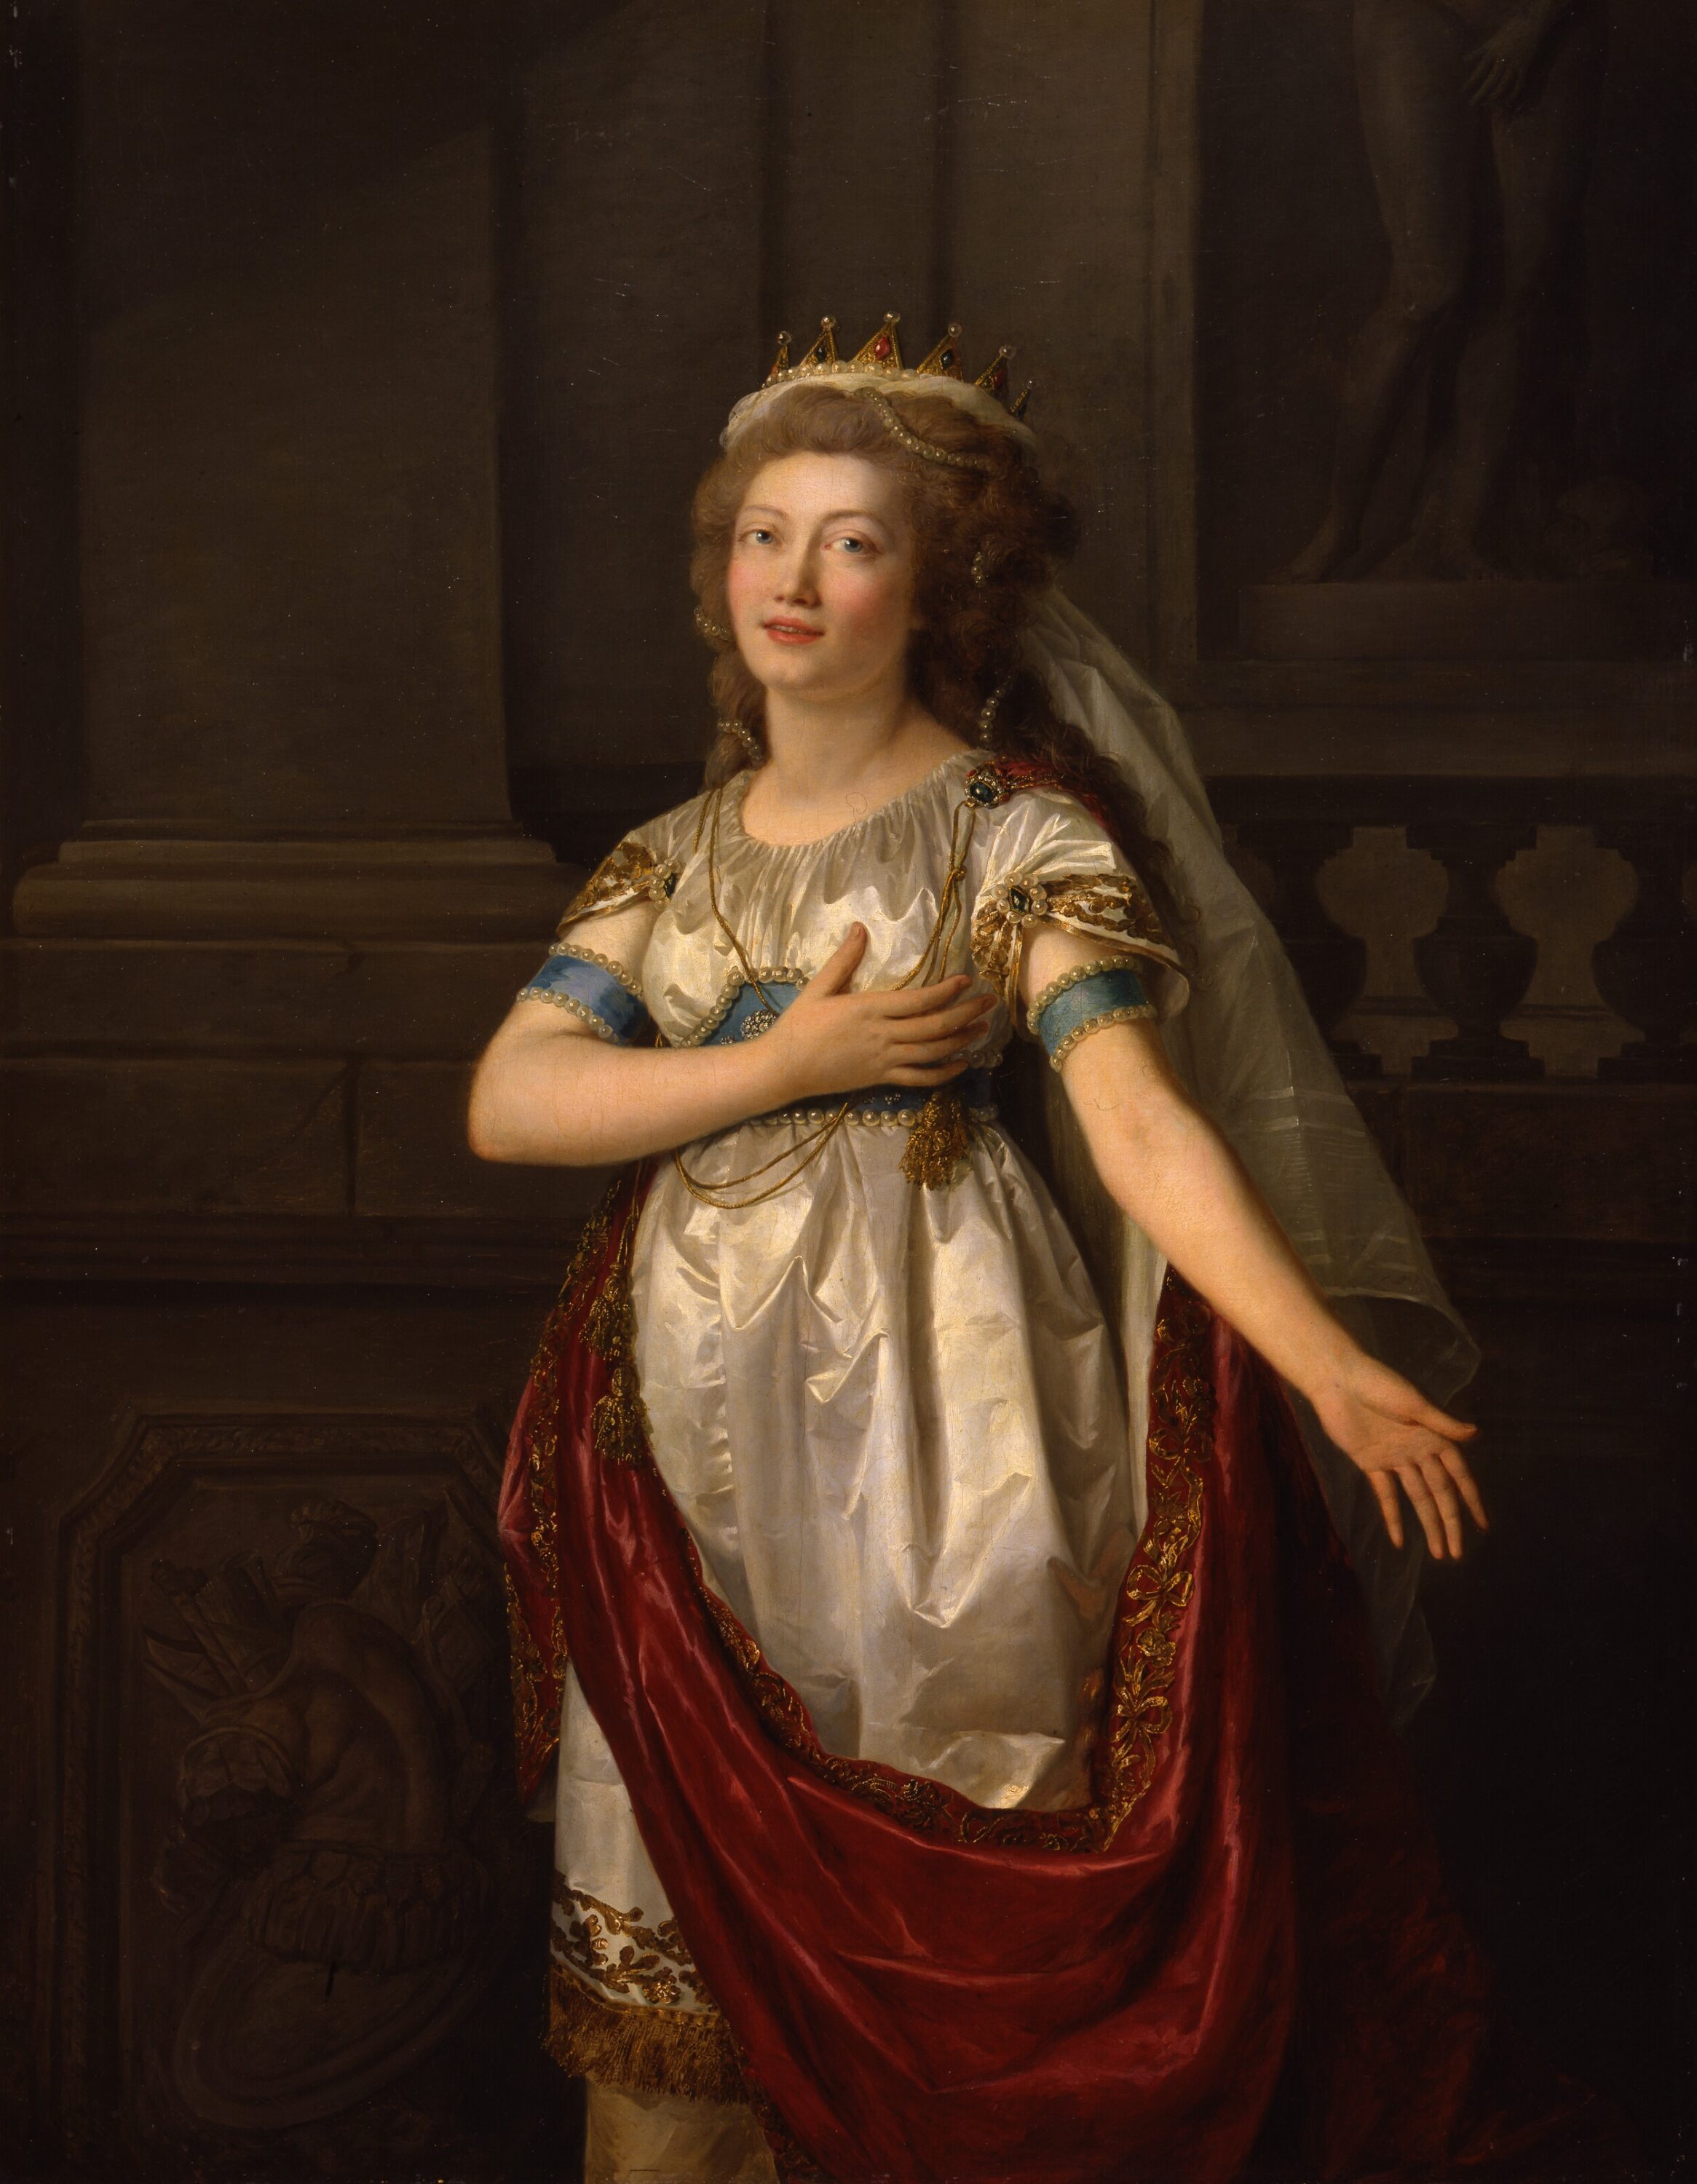 Realistic painting of a light-skinned woman with elaborately-coiffed medium-brown hair, gazing at the viewer, wearing a classic white silk dress and red draped cape with gold embellishments, gesturing dramatically with one hand over her heart and the other extended outward.